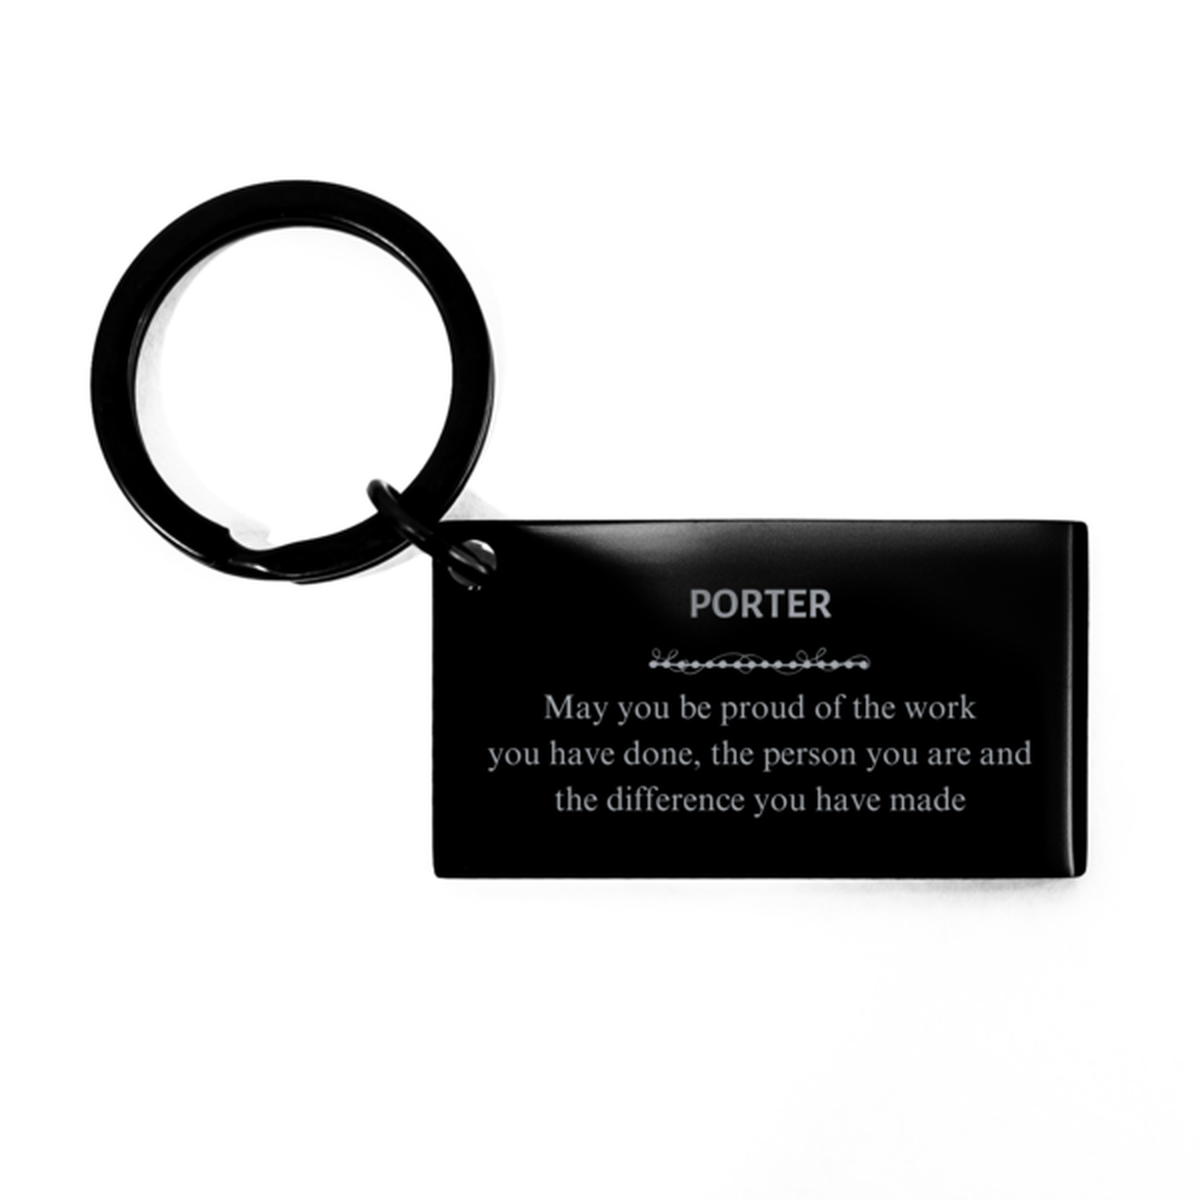 Securities Trader May you be proud of the work you have done, Retirement Porter Keychain for Colleague Appreciation Gifts Amazing for Porter